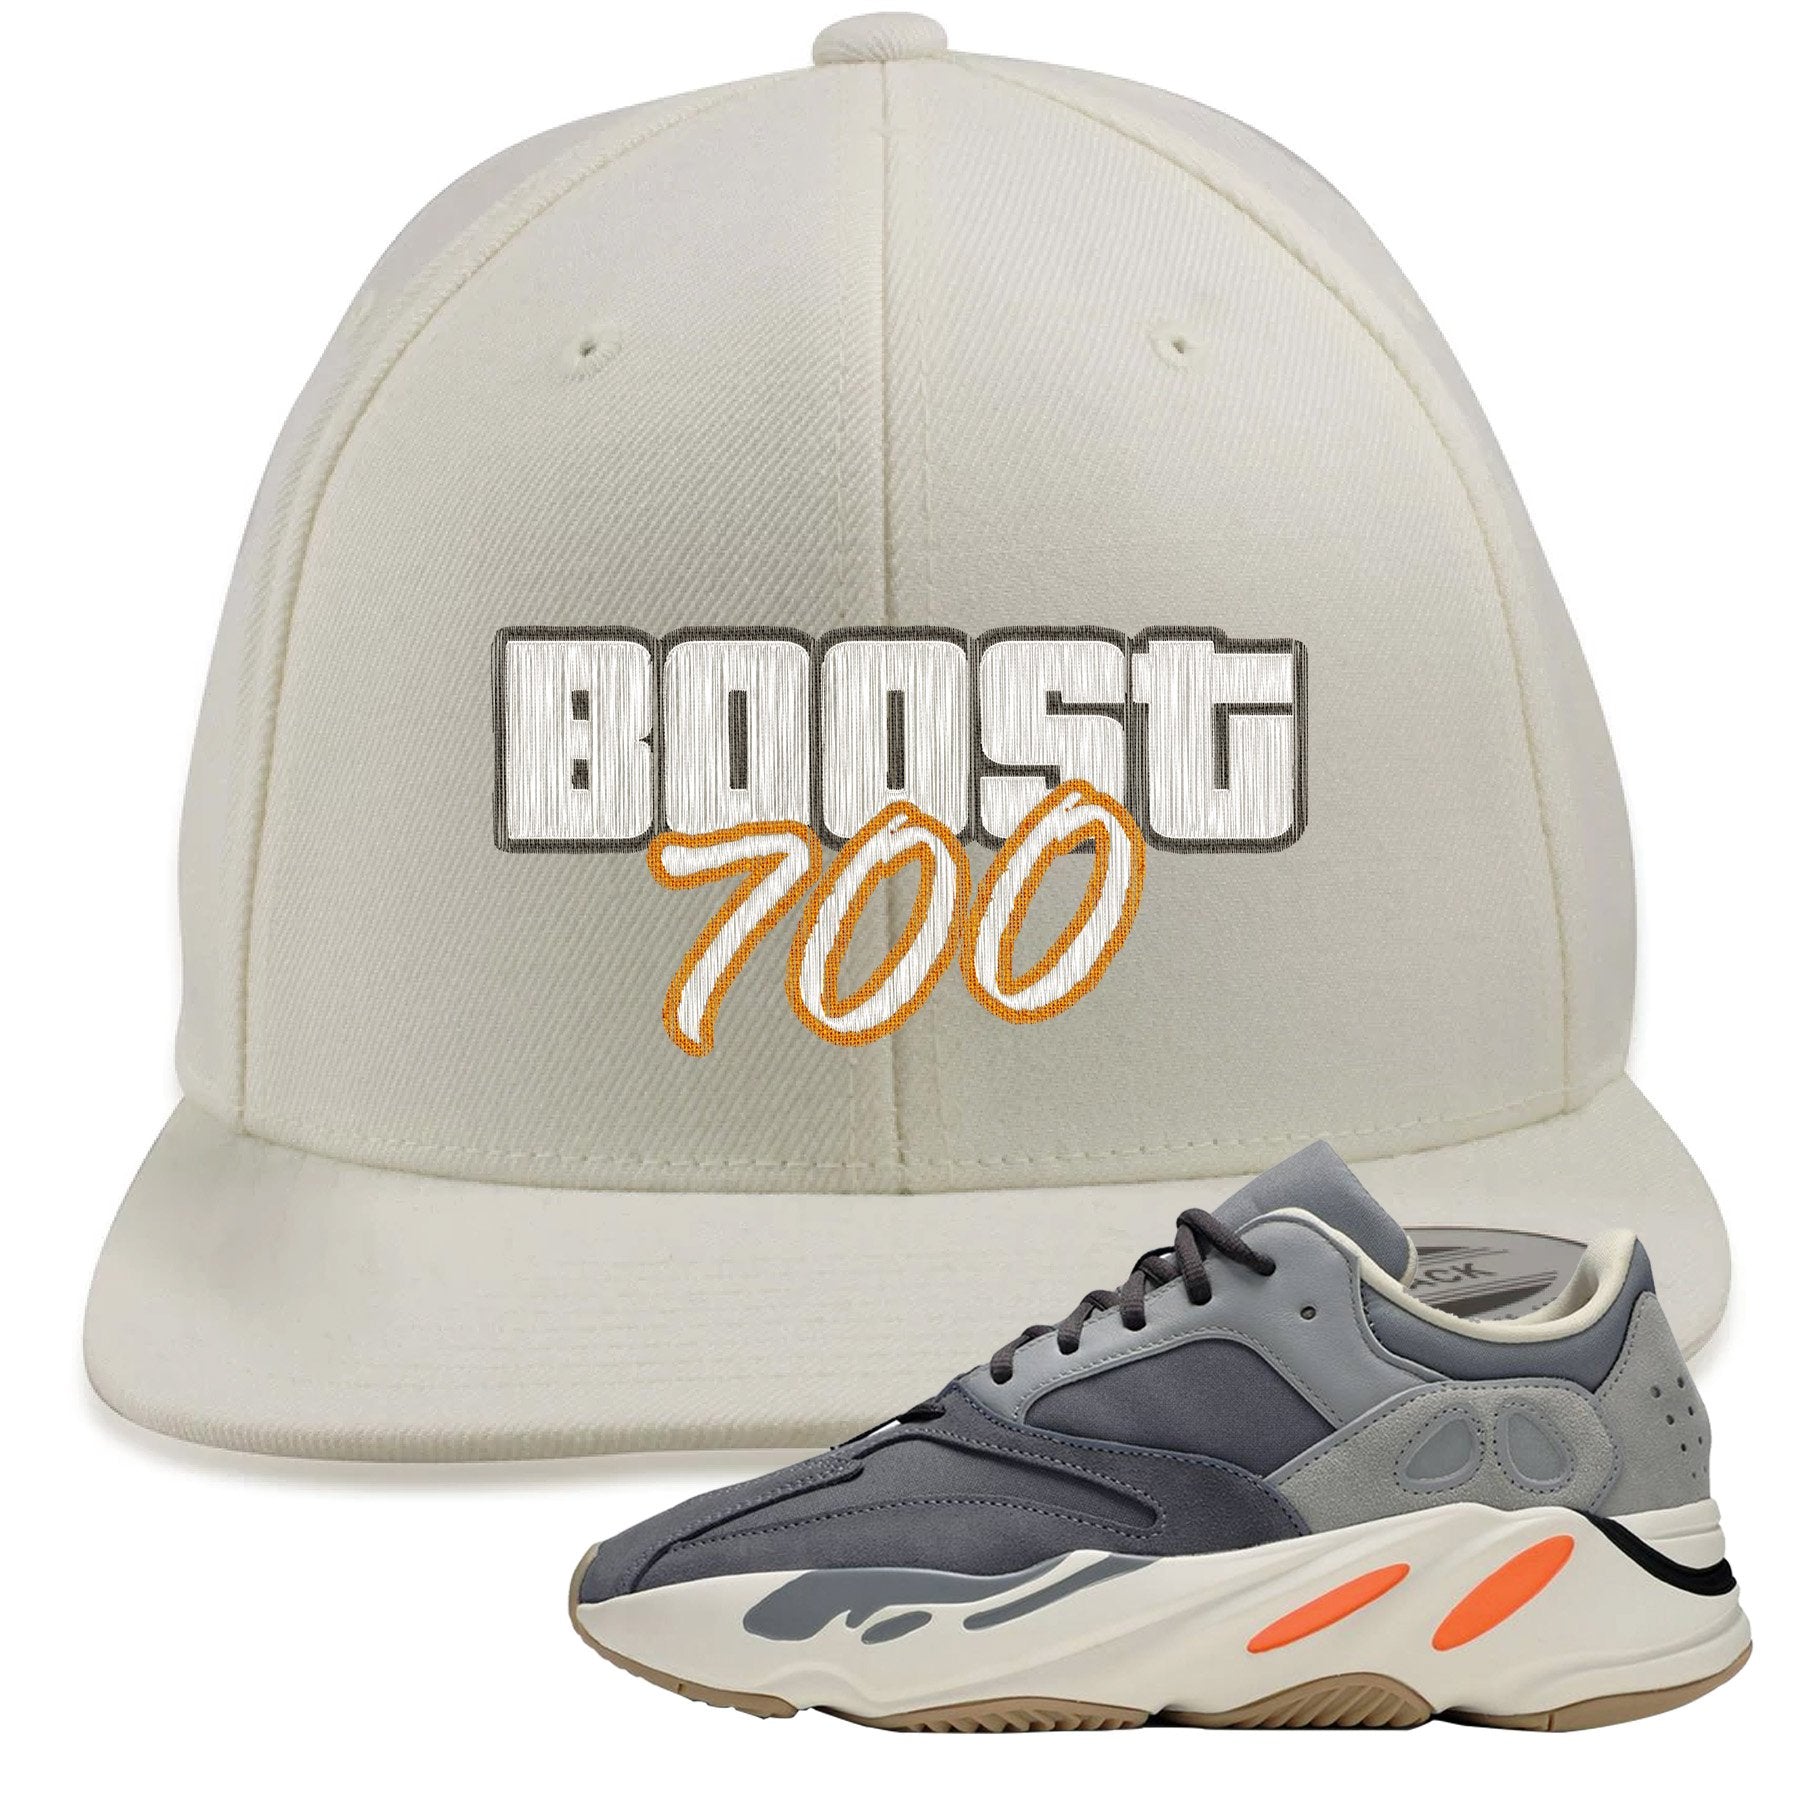 Yeezy Boost 700 Magnet Sneaker Matching GTA Cover Lettering White Snapback Hat